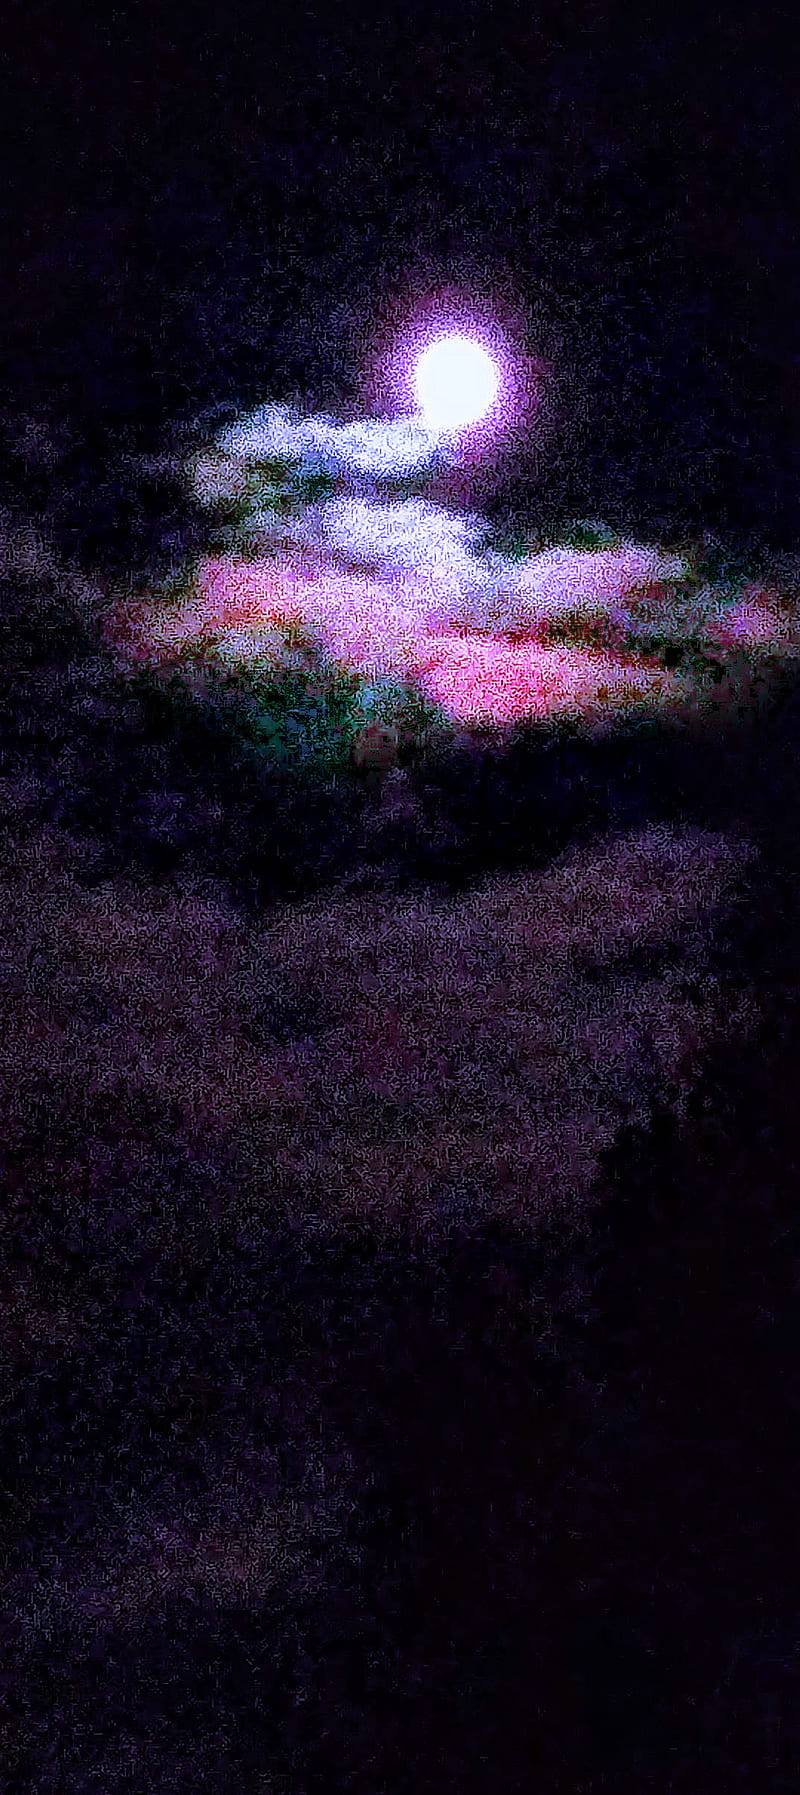 psychedelic night sky